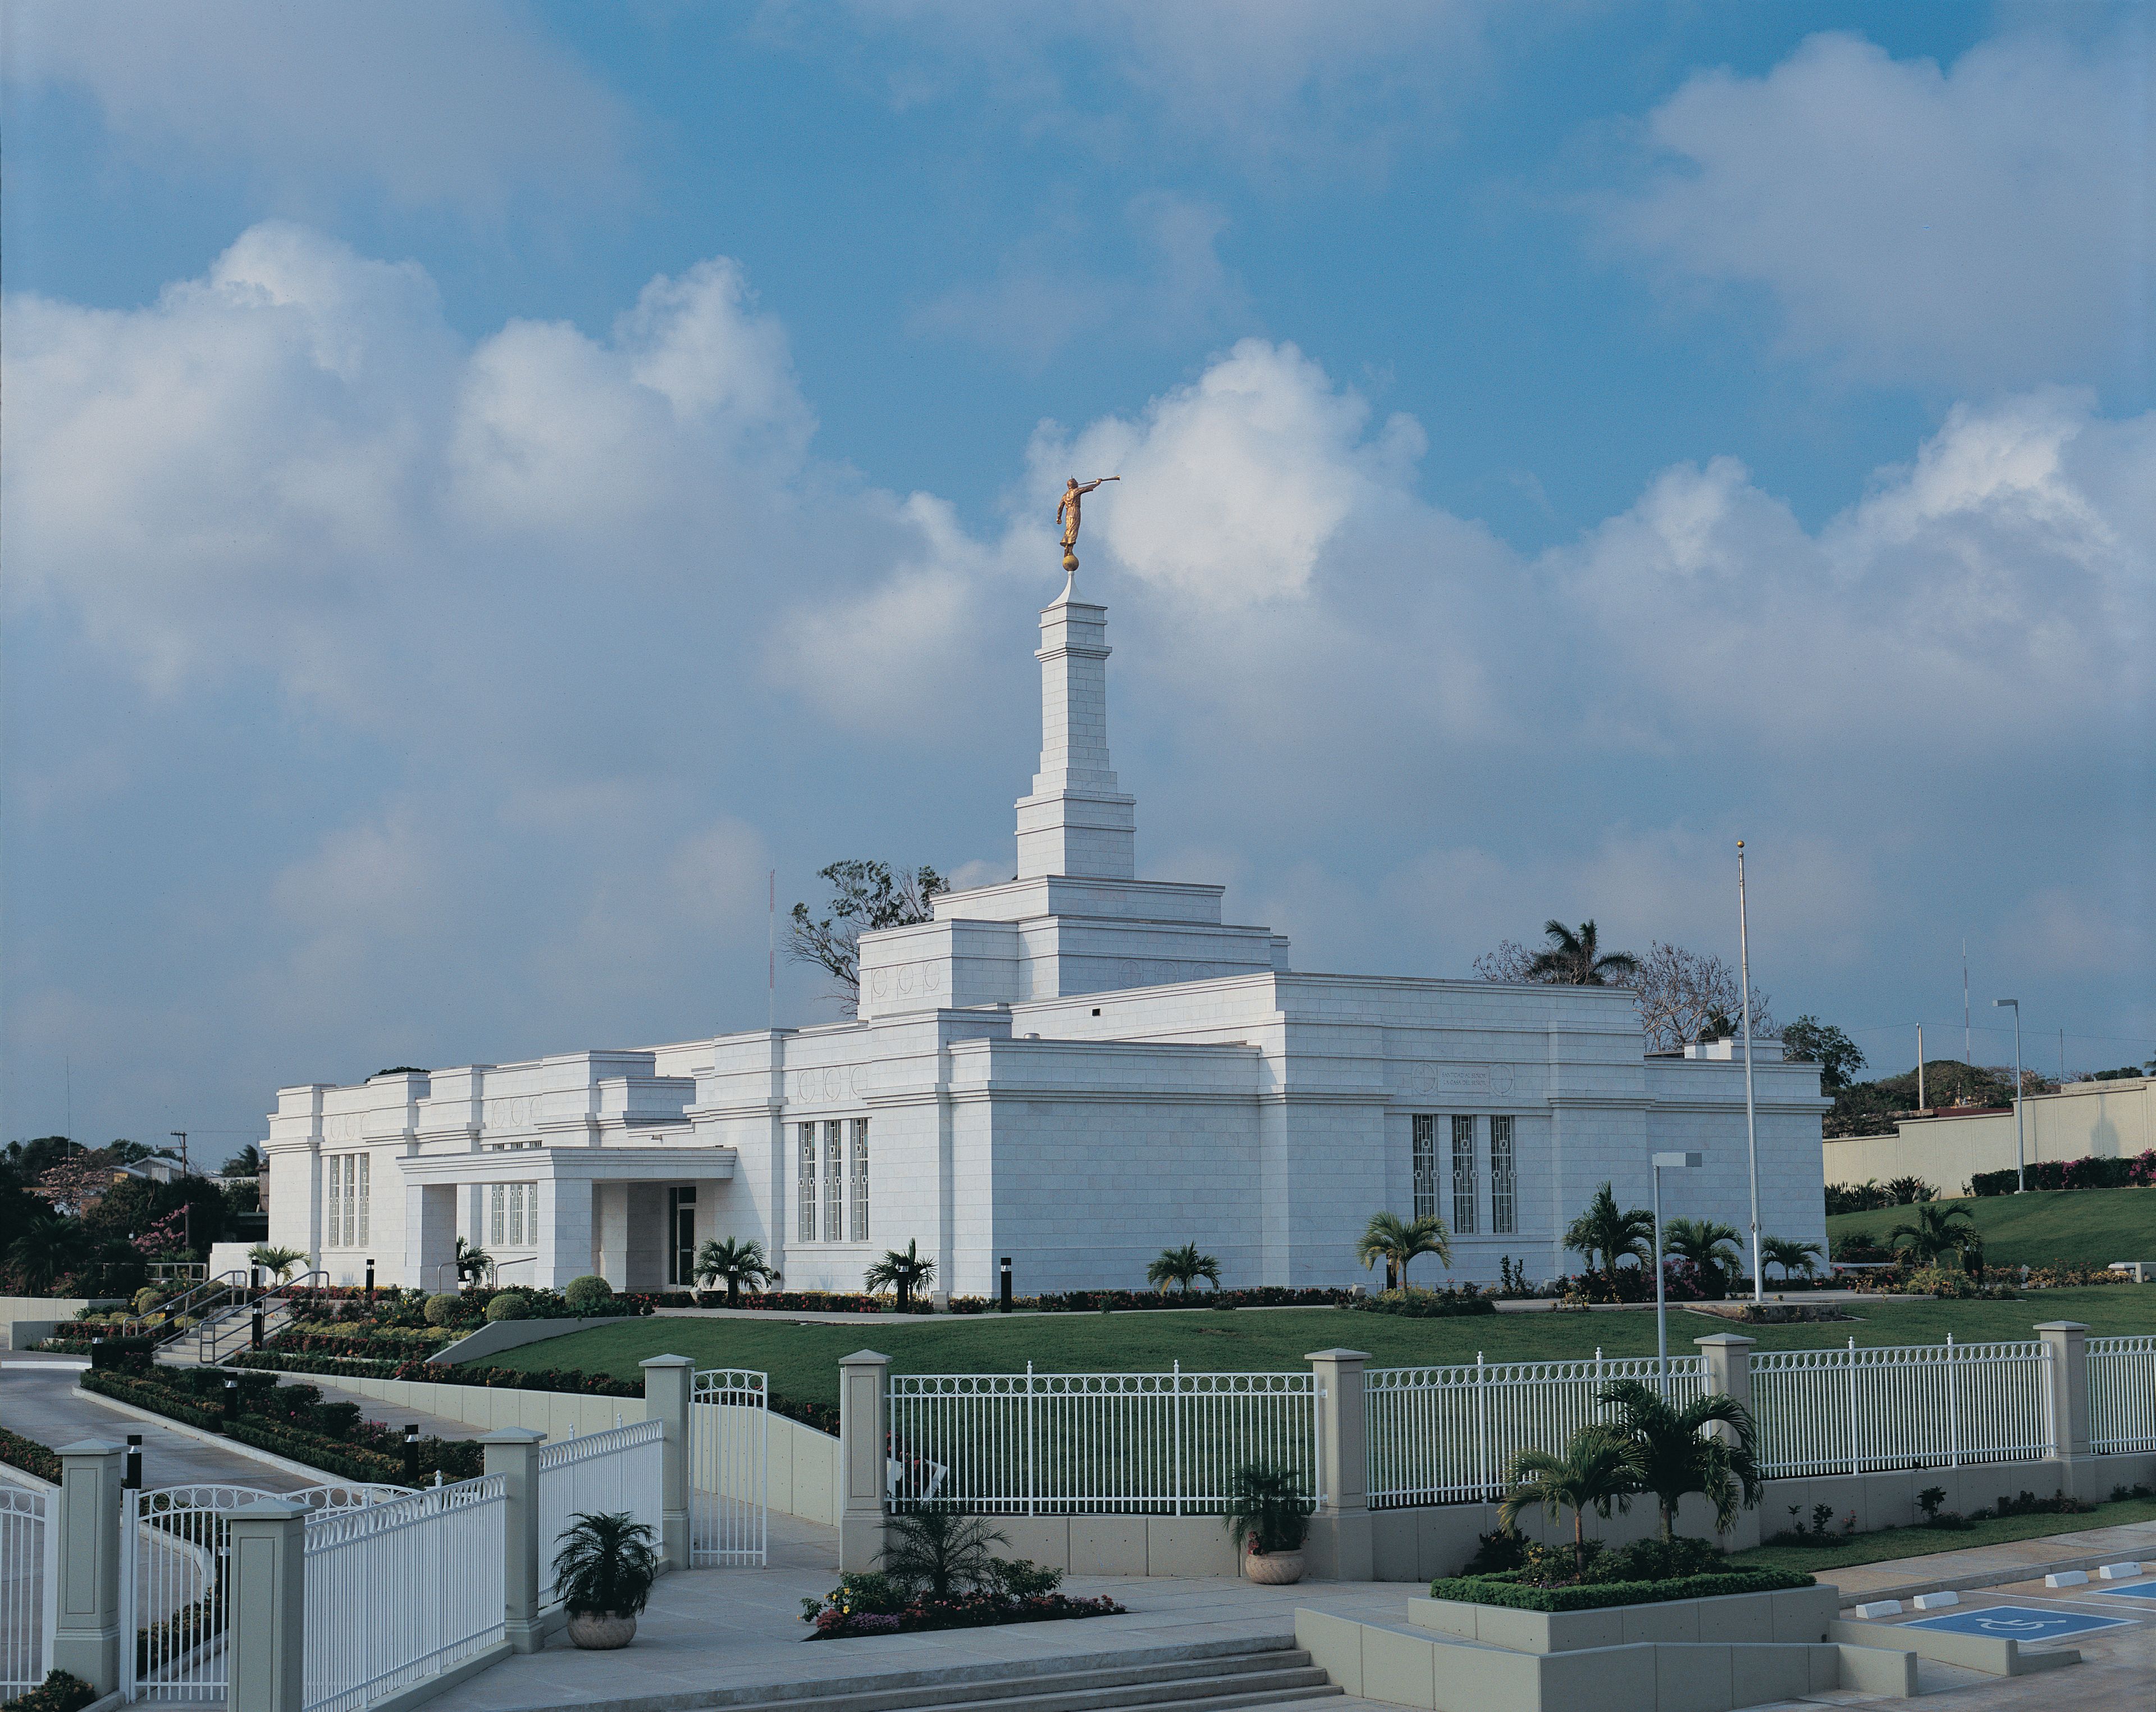 The Tampico Mexico Temple, including the scenery and entrance.